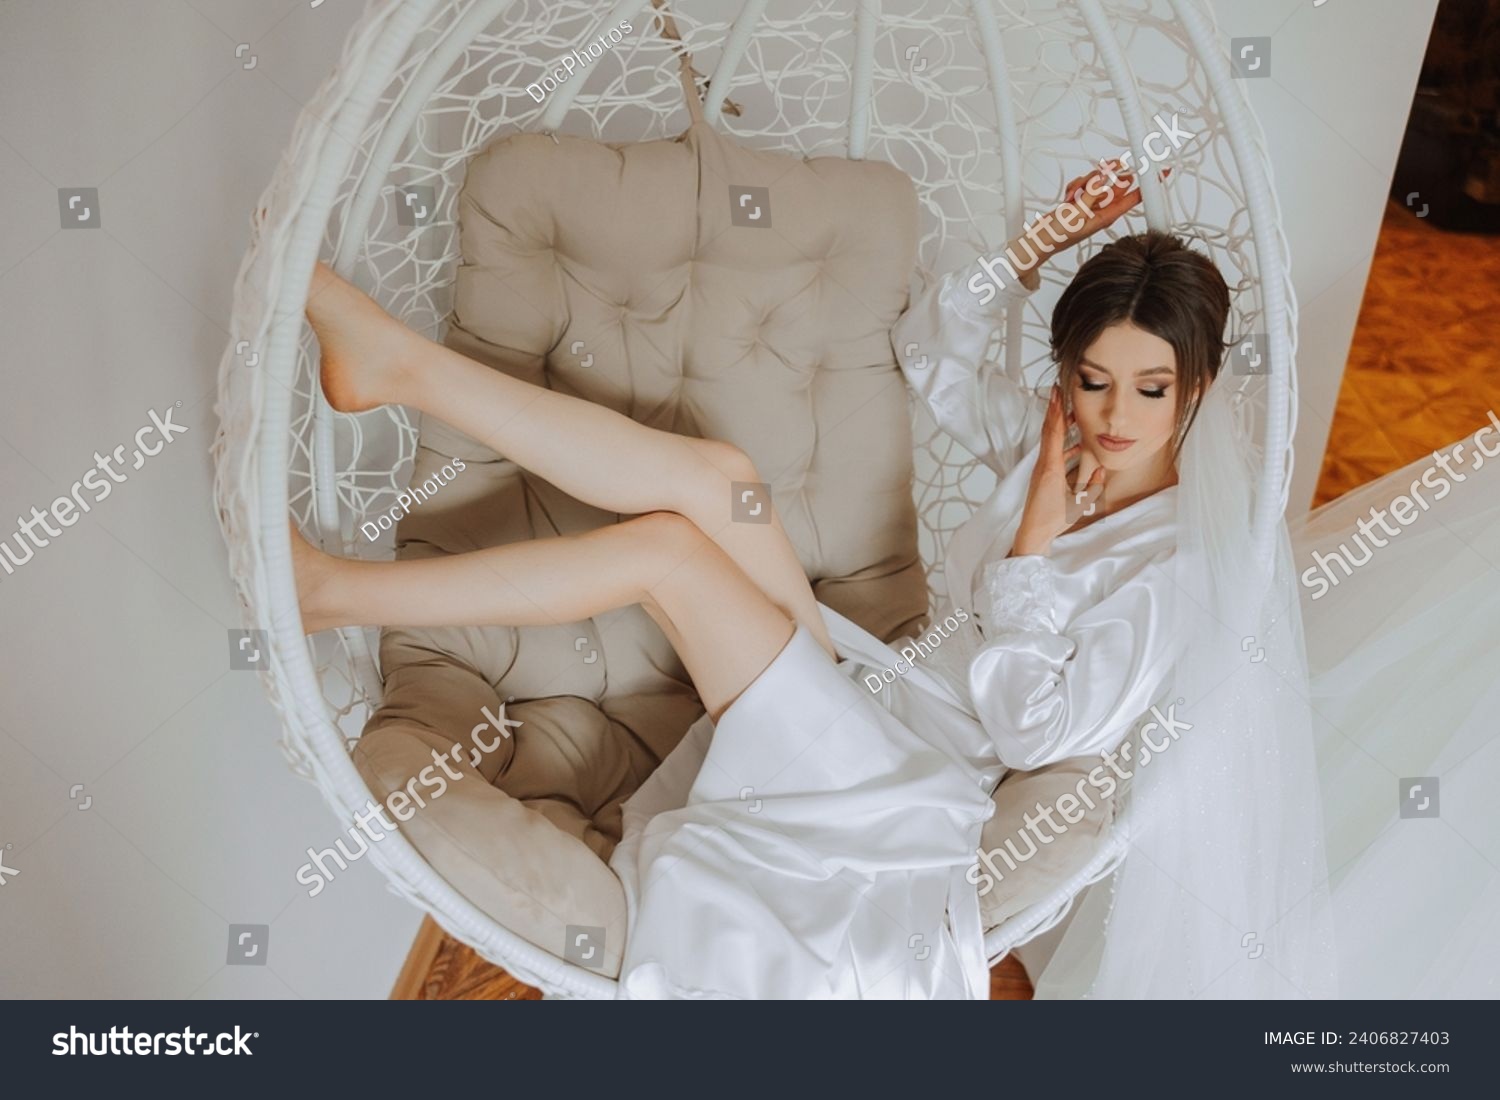 Morning of the bride in boudoir style. A woman bride in a white robe sits on a wicker swing near her wedding dress on a mannequin. Wedding day. #2406827403